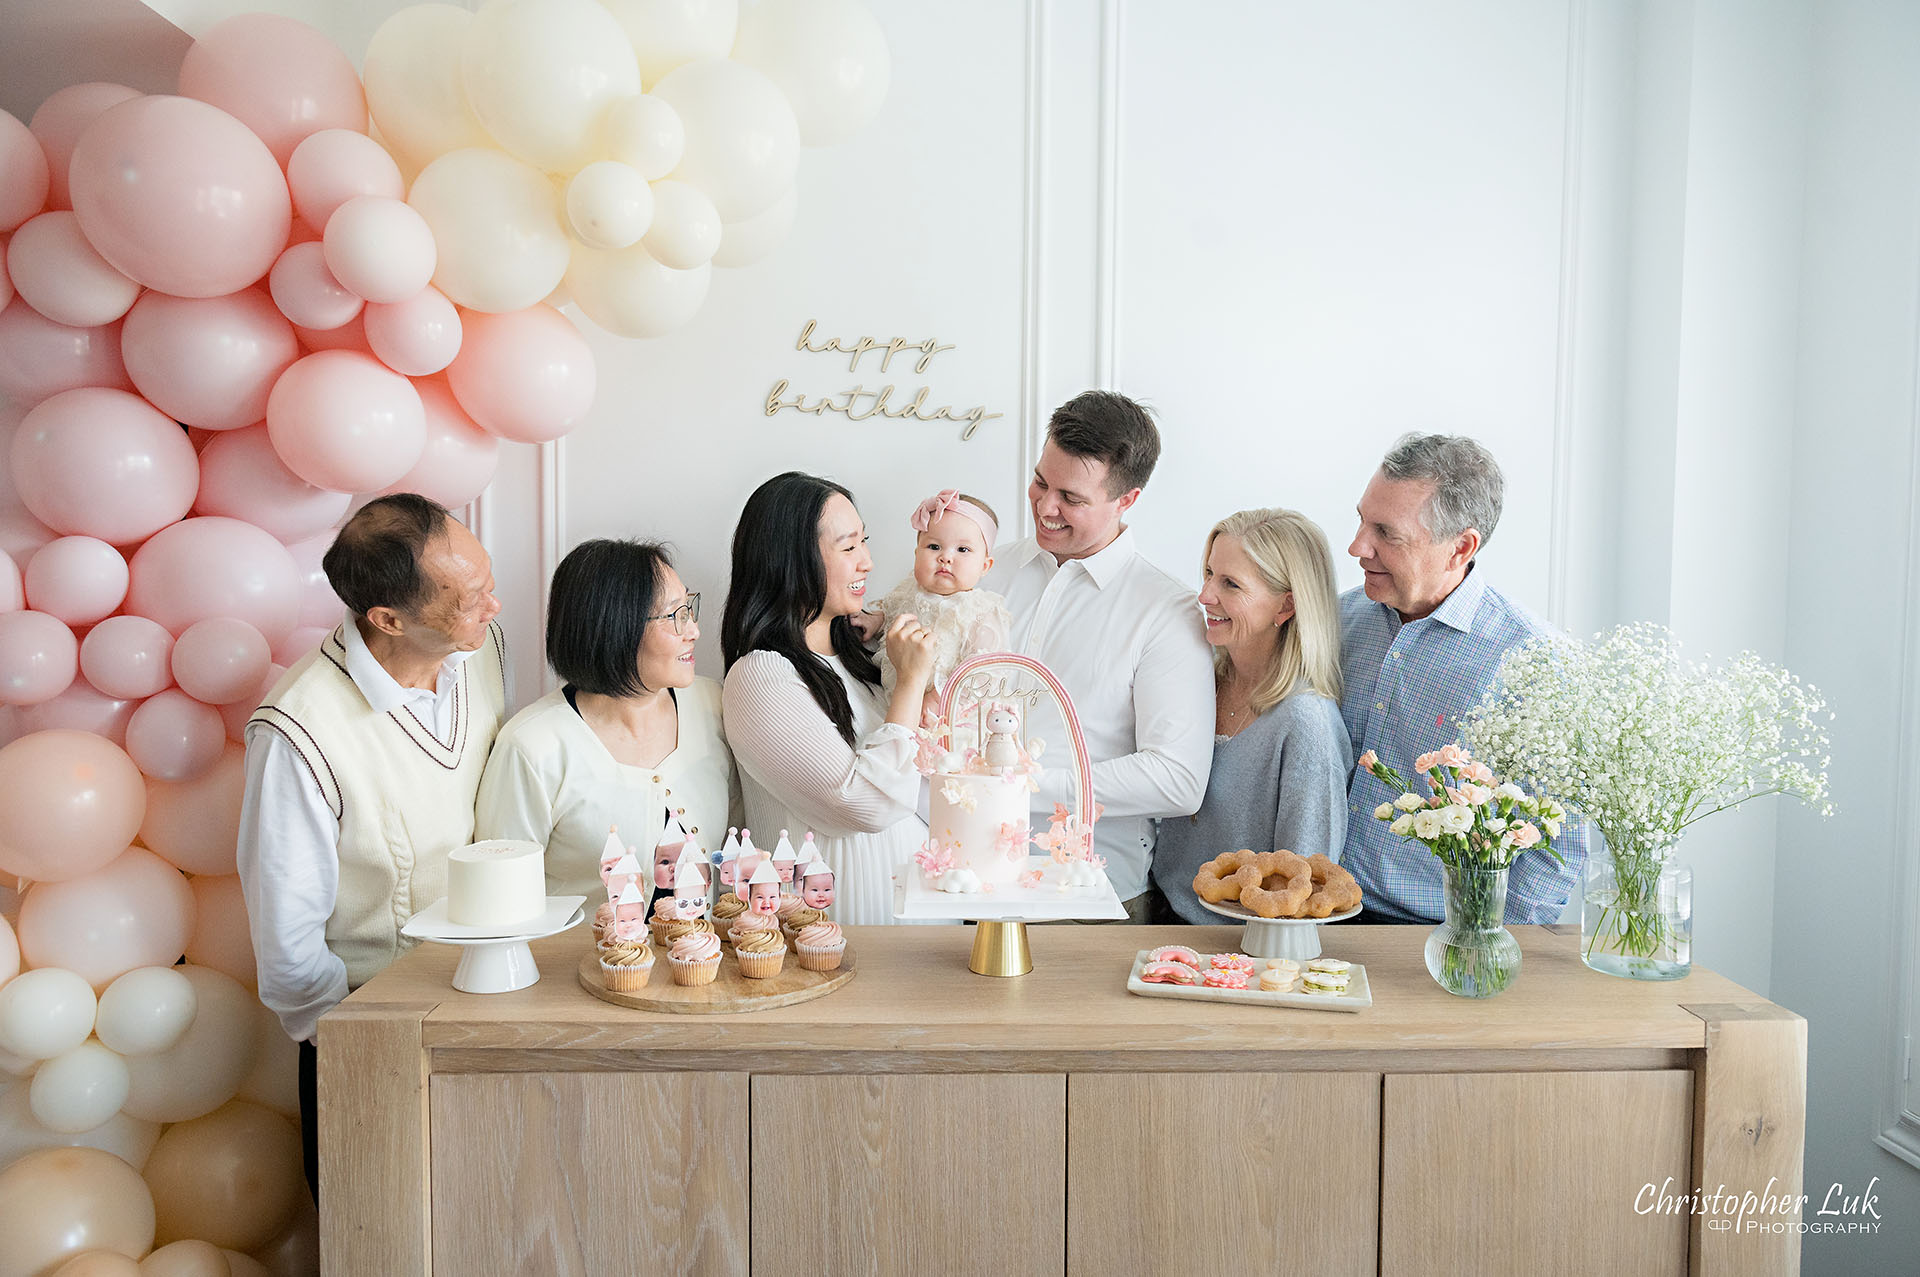 Dad Father Mom Mother Grandparents Grandmother Grandfather Daughter Baby Girl Birthday Family Picture Photo Candid Photojournalistic Natural 